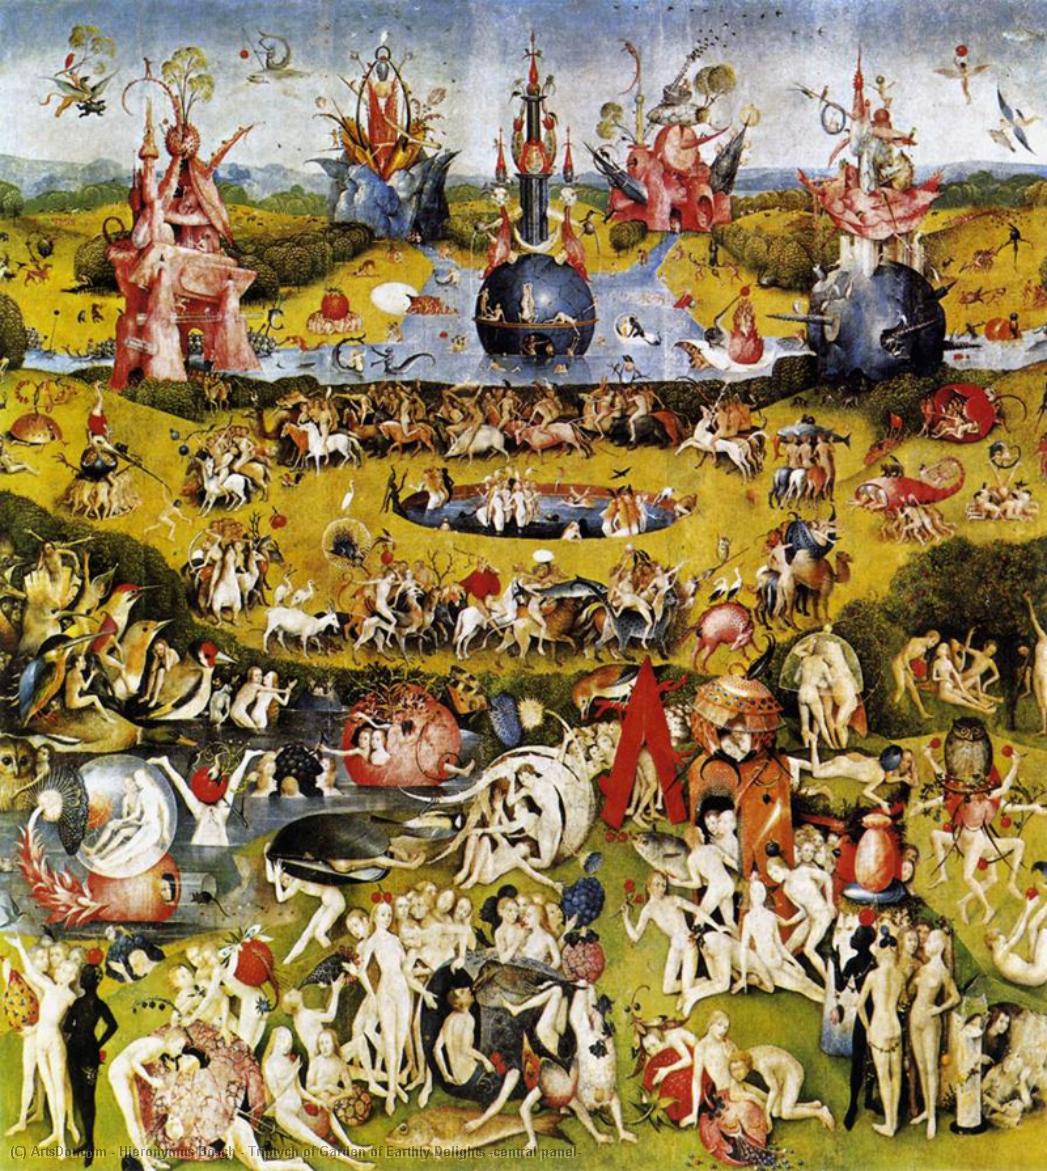 WikiOO.org - 백과 사전 - 회화, 삽화 Hieronymus Bosch - Triptych of Garden of Earthly Delights (central panel)